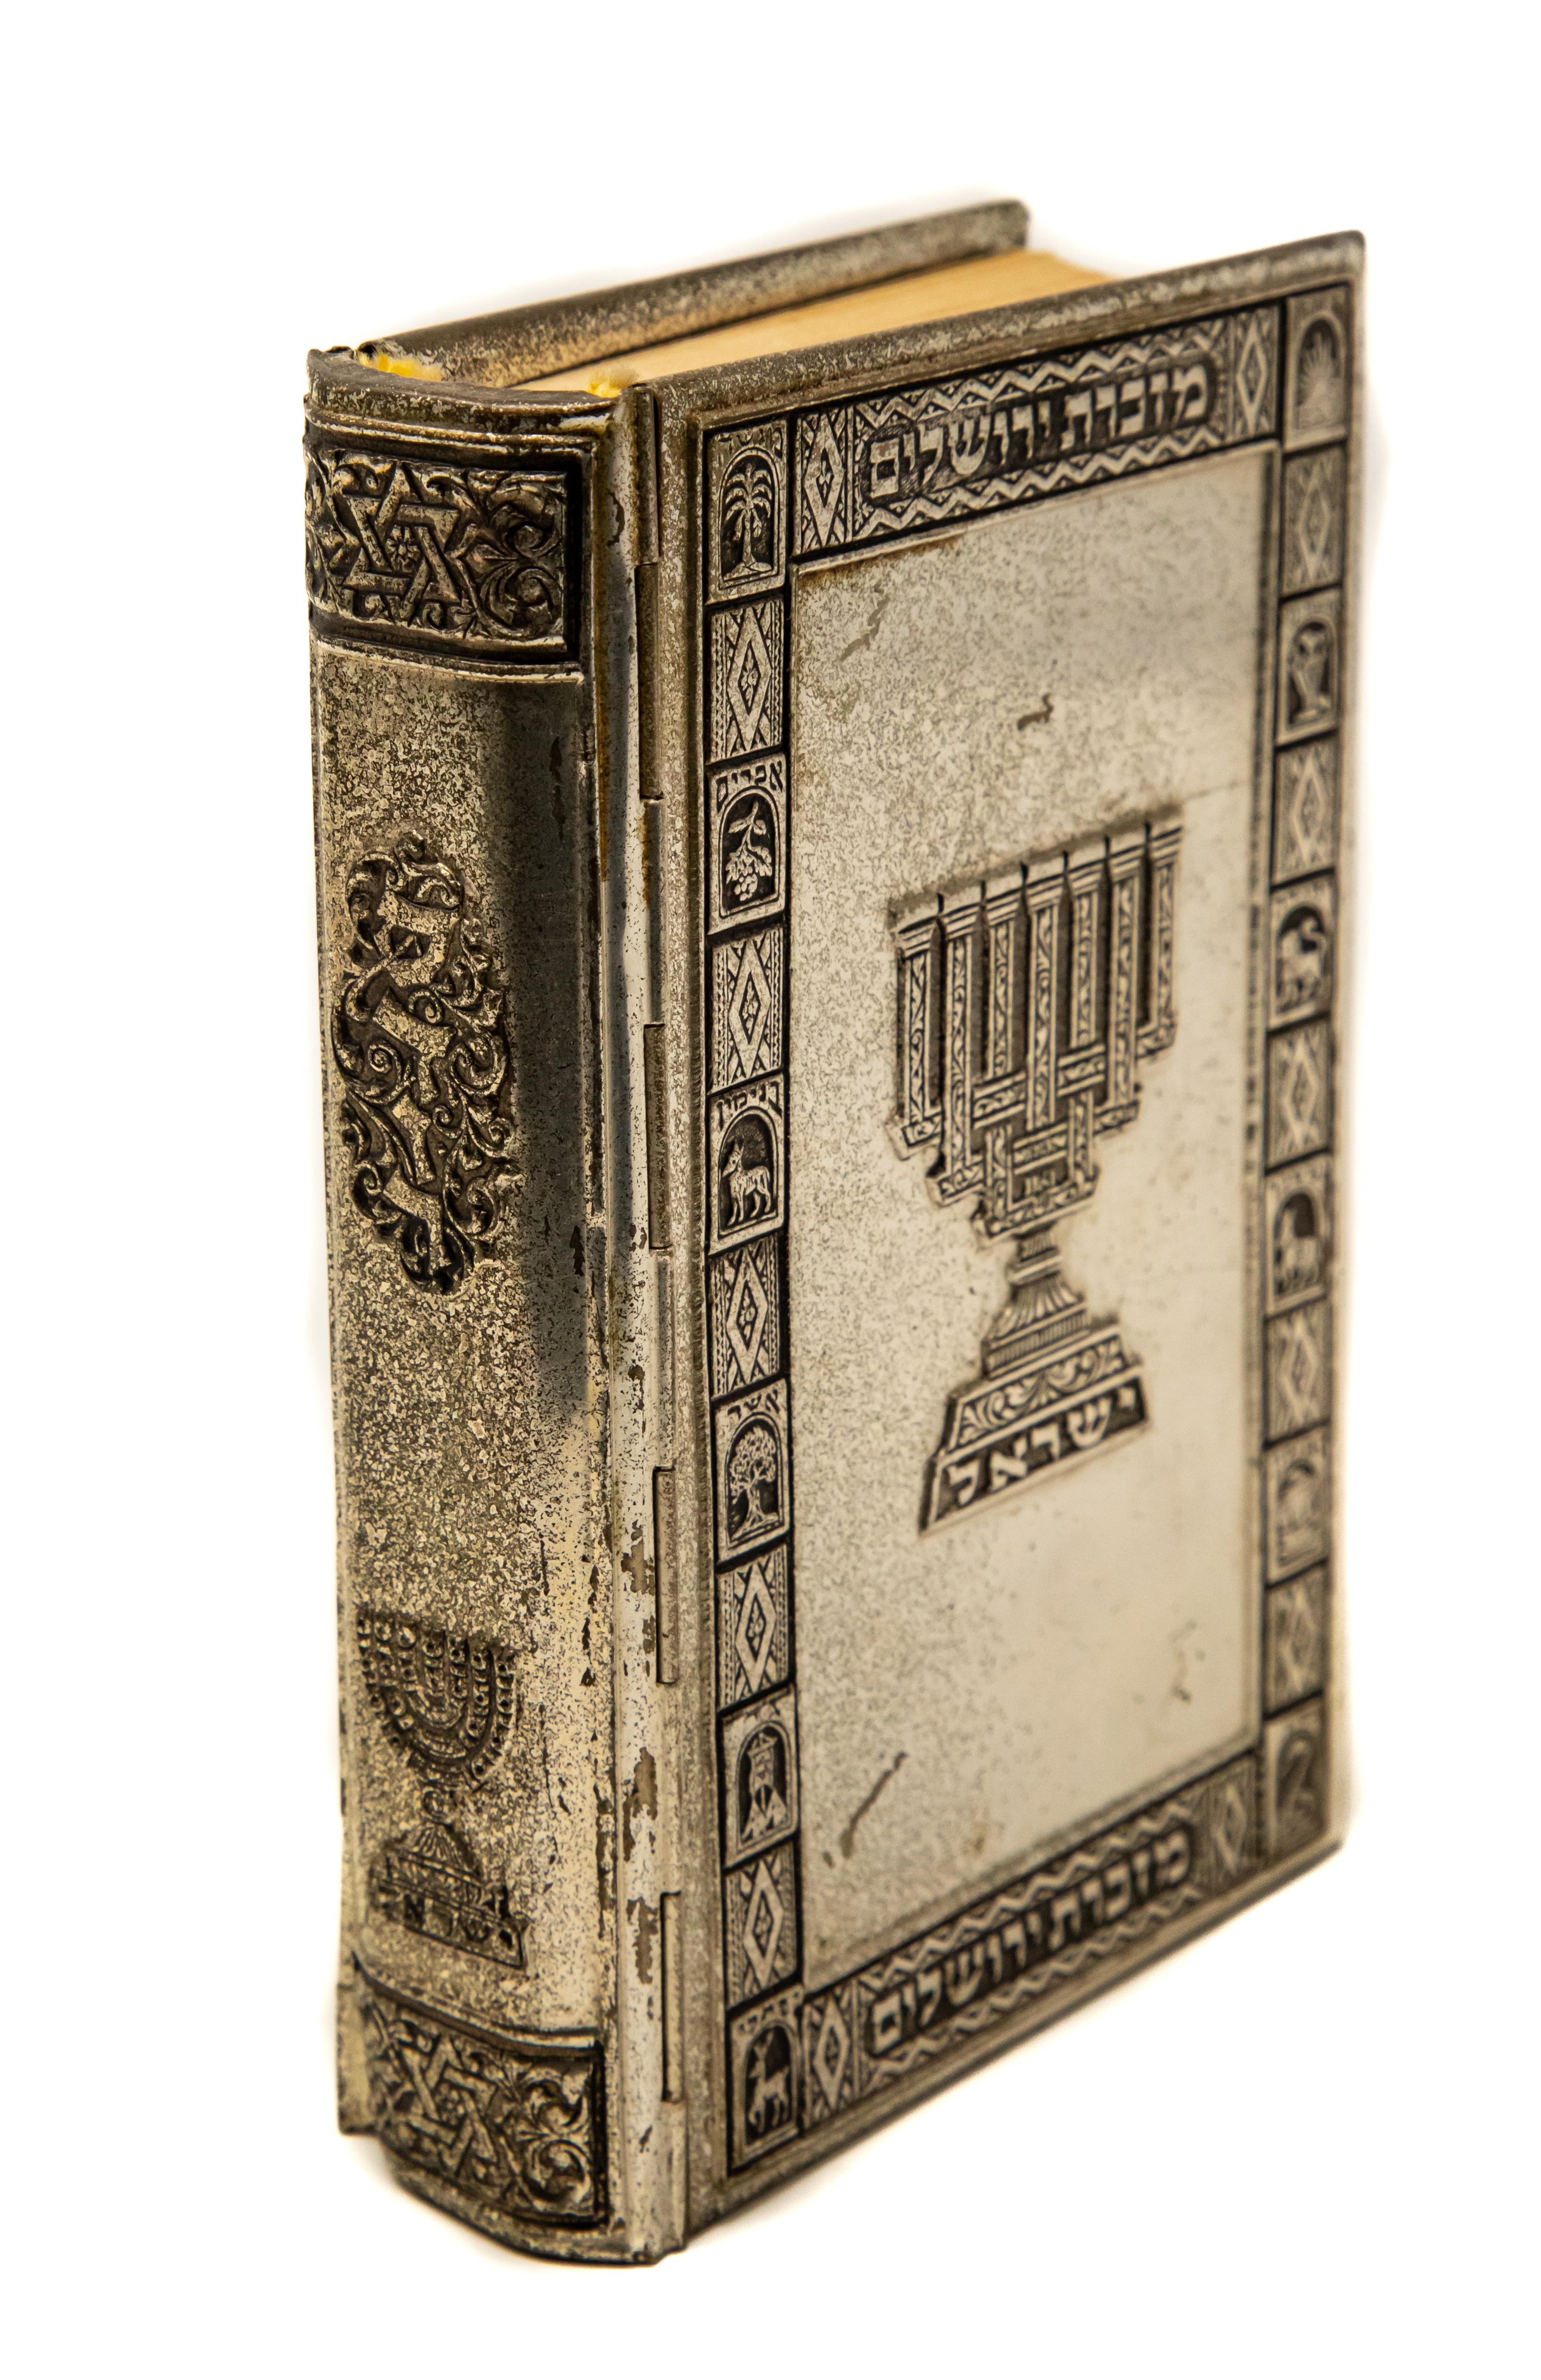 Offering this magnificent sterling silver prayer book. The book is in English and Islam. The cover is sterling silver with filigree. One side has a crown that is over two arched tablets. The other side depicts a menorah. A metal-bound Jewish prayer